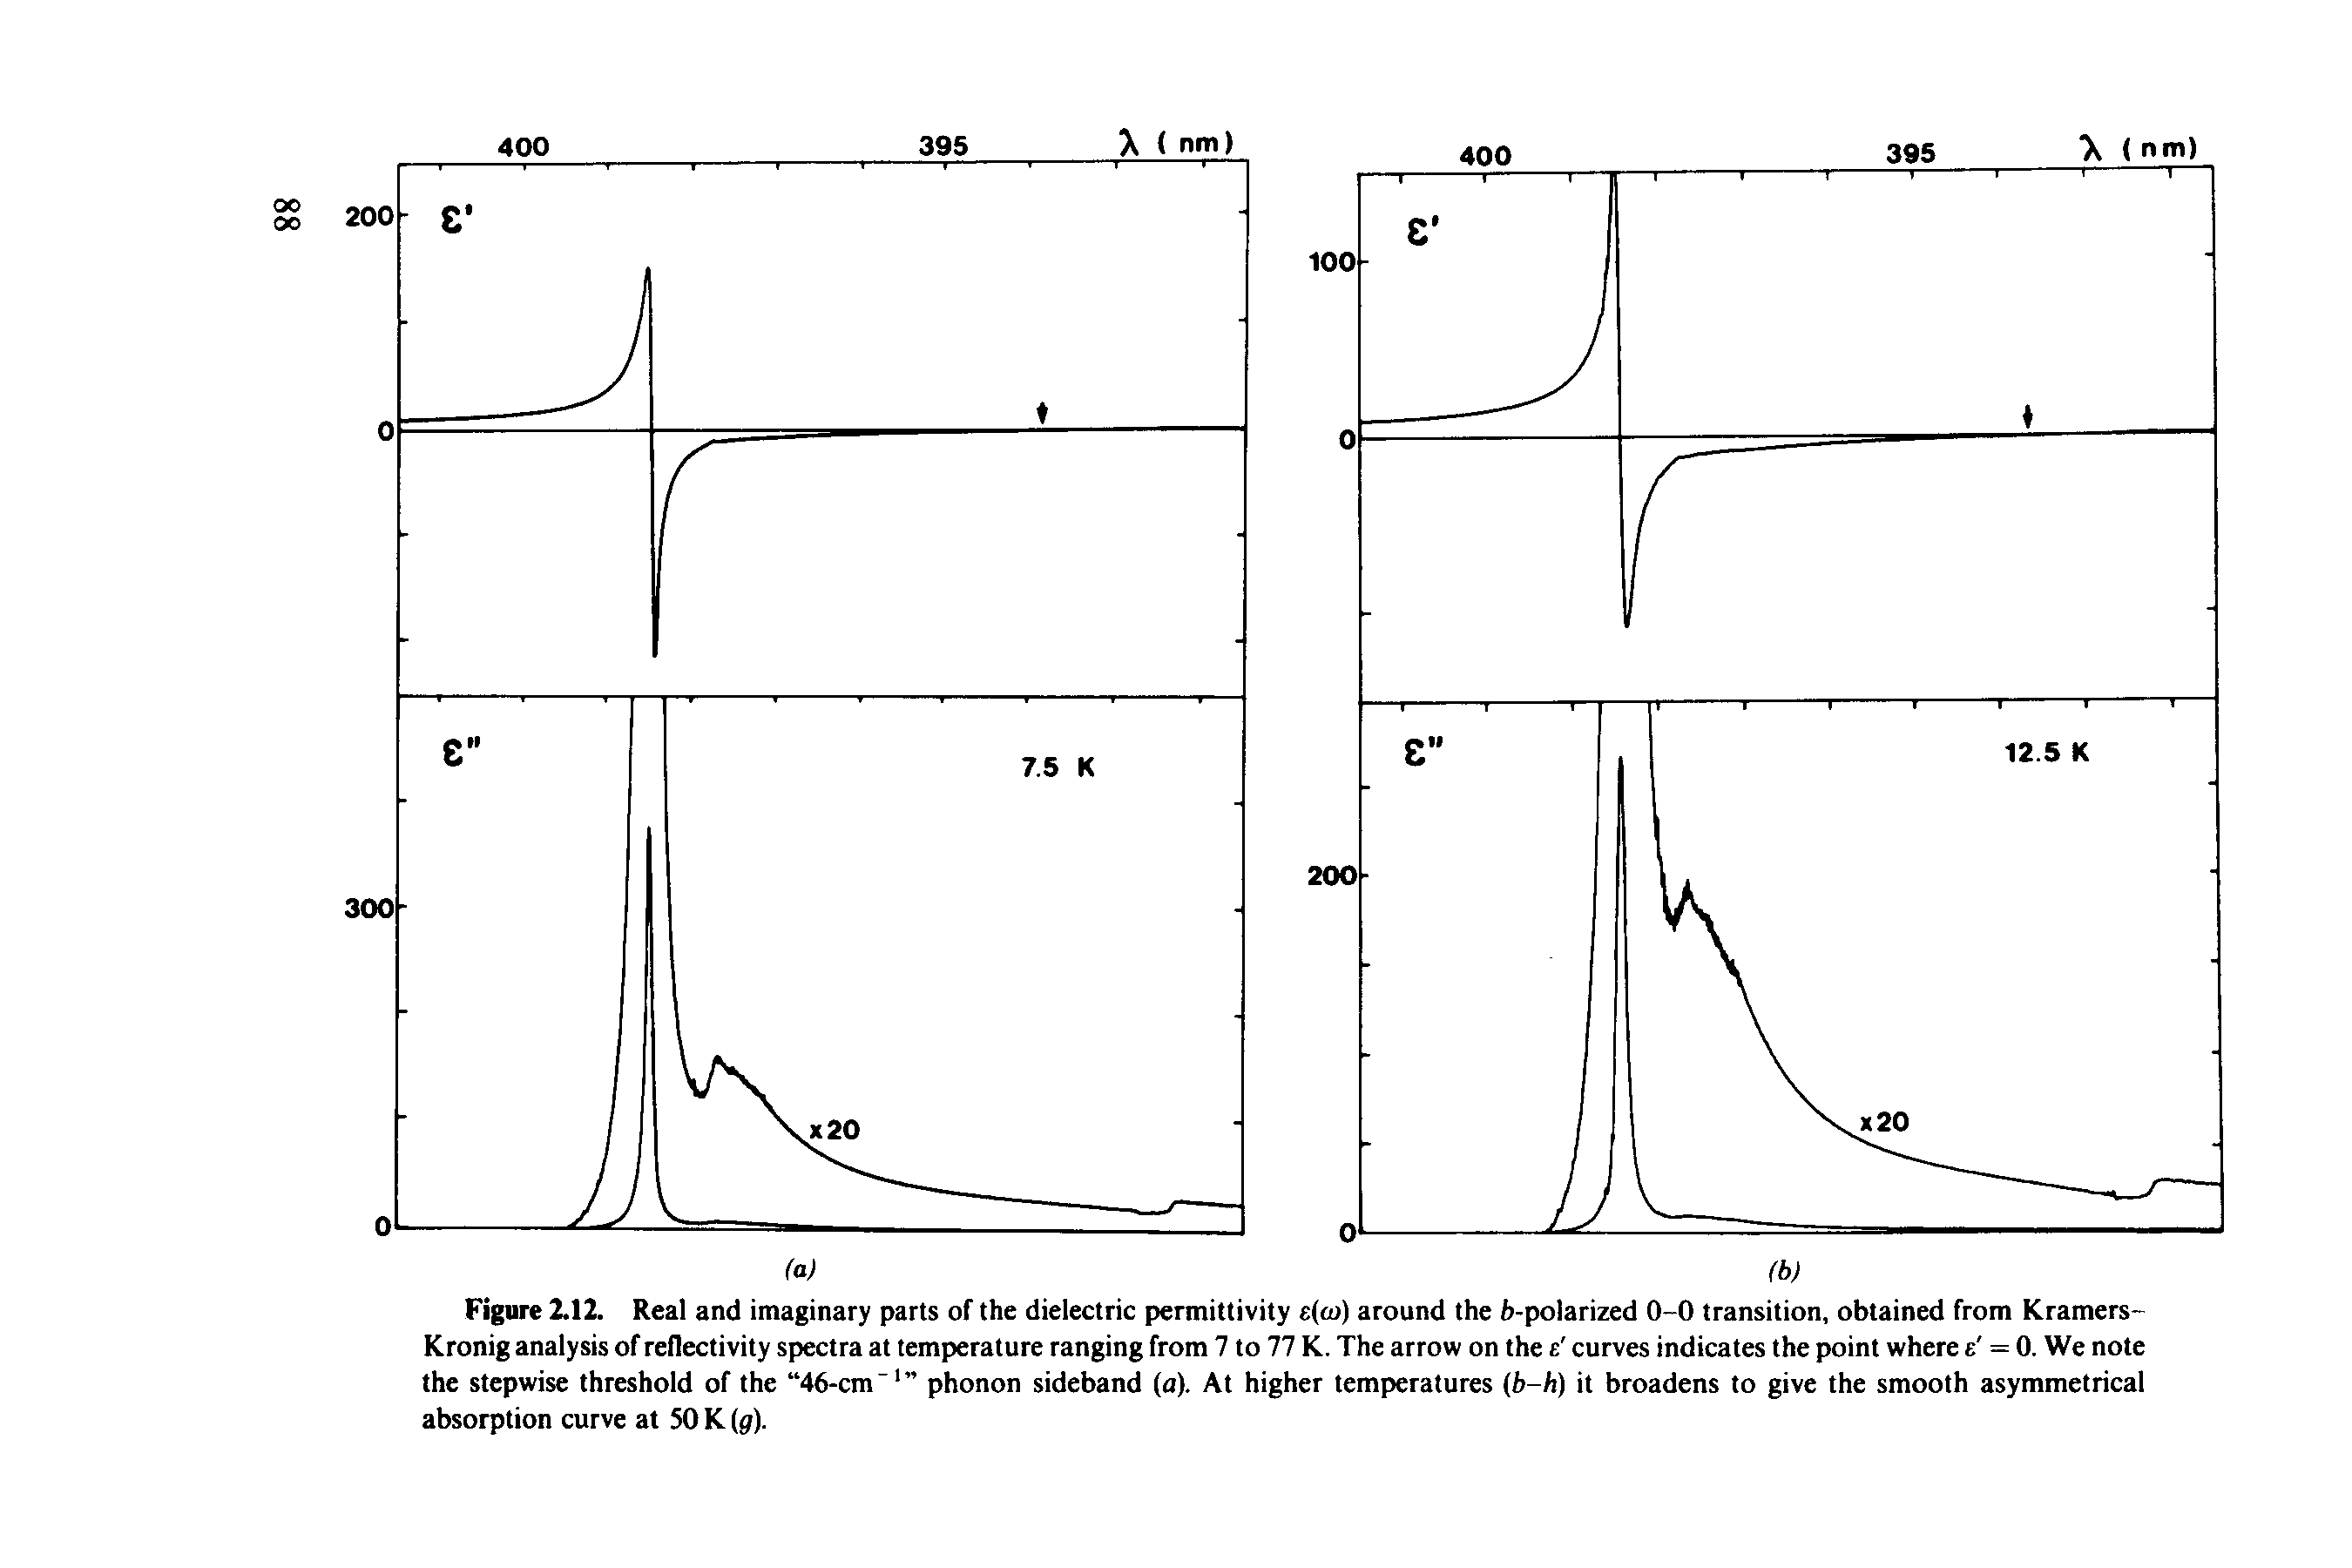 Figure 2.12. Real and imaginary parts of the dielectric permittivity e(co) around the fe-polarized 0-0 transition, obtained from Kramers-Kronig analysis of rellectivity spectra at temperature ranging from 7 to 77 K. The arrow on the r. curves indicates the point where e = 0. We note the stepwise threshold of the 46-cm-1 phonon sideband (a). At higher temperatures (b-h) it broadens to give the smooth asymmetrical absorption curve at SO K (g).